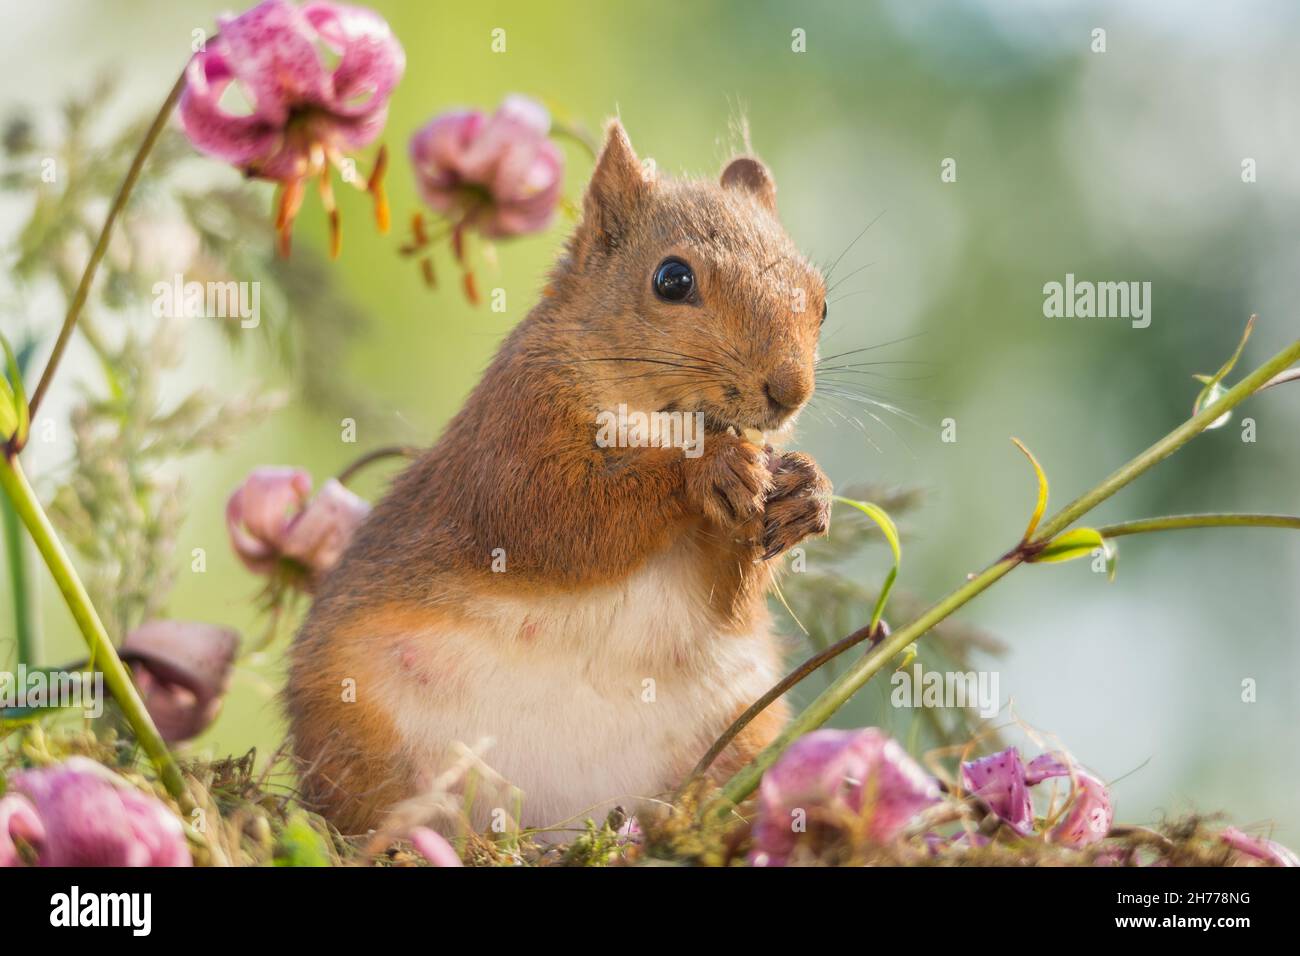 female red squirrel standing with flowers Stock Photo